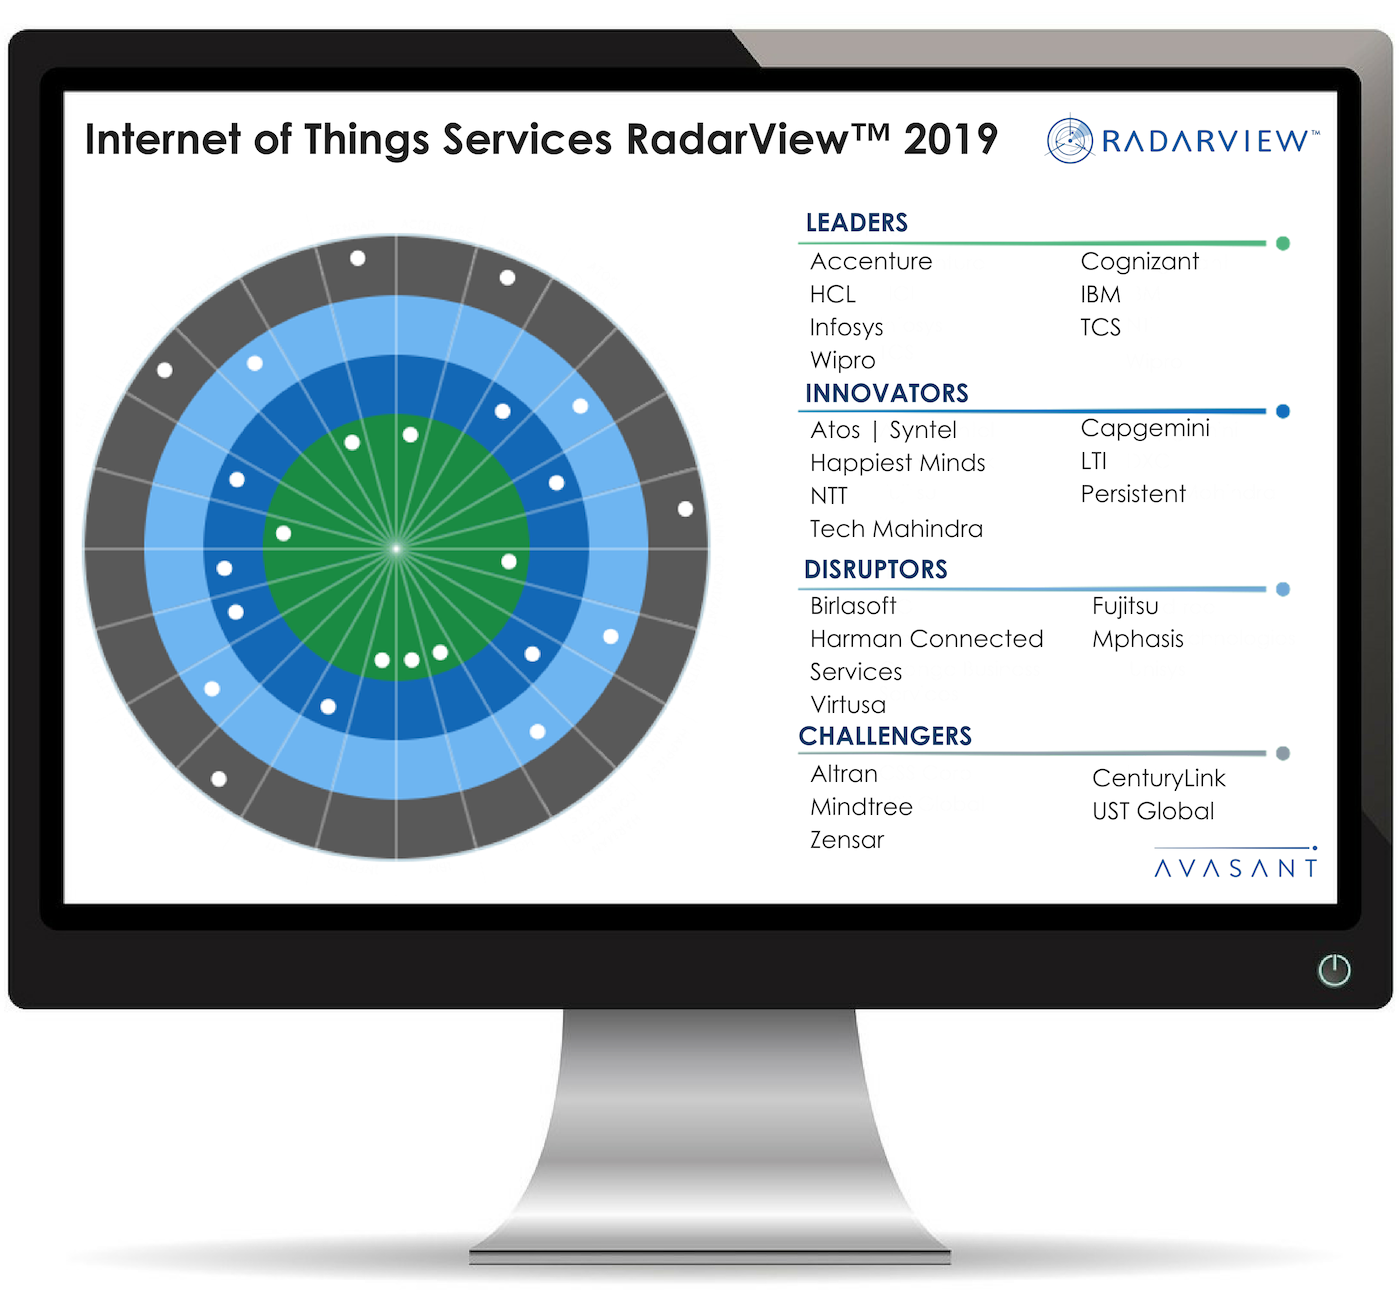 IoT Graphic Updated for provider profiles 1 - Internet of Things 2019 Harman Connected Services RadarView™ Profile